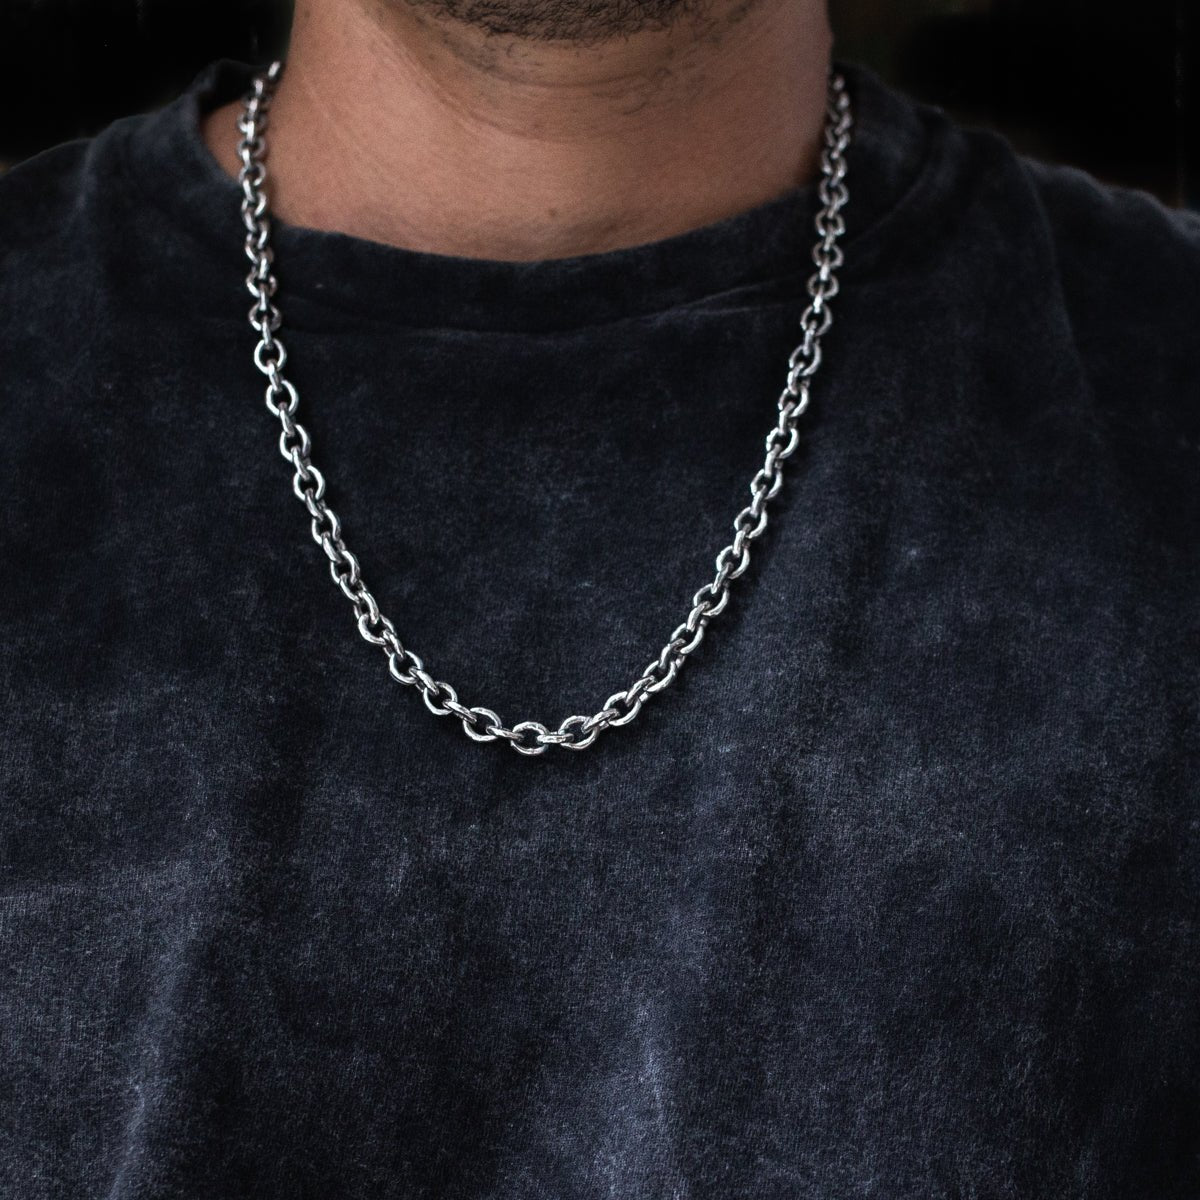 Rugged Chain Necklace